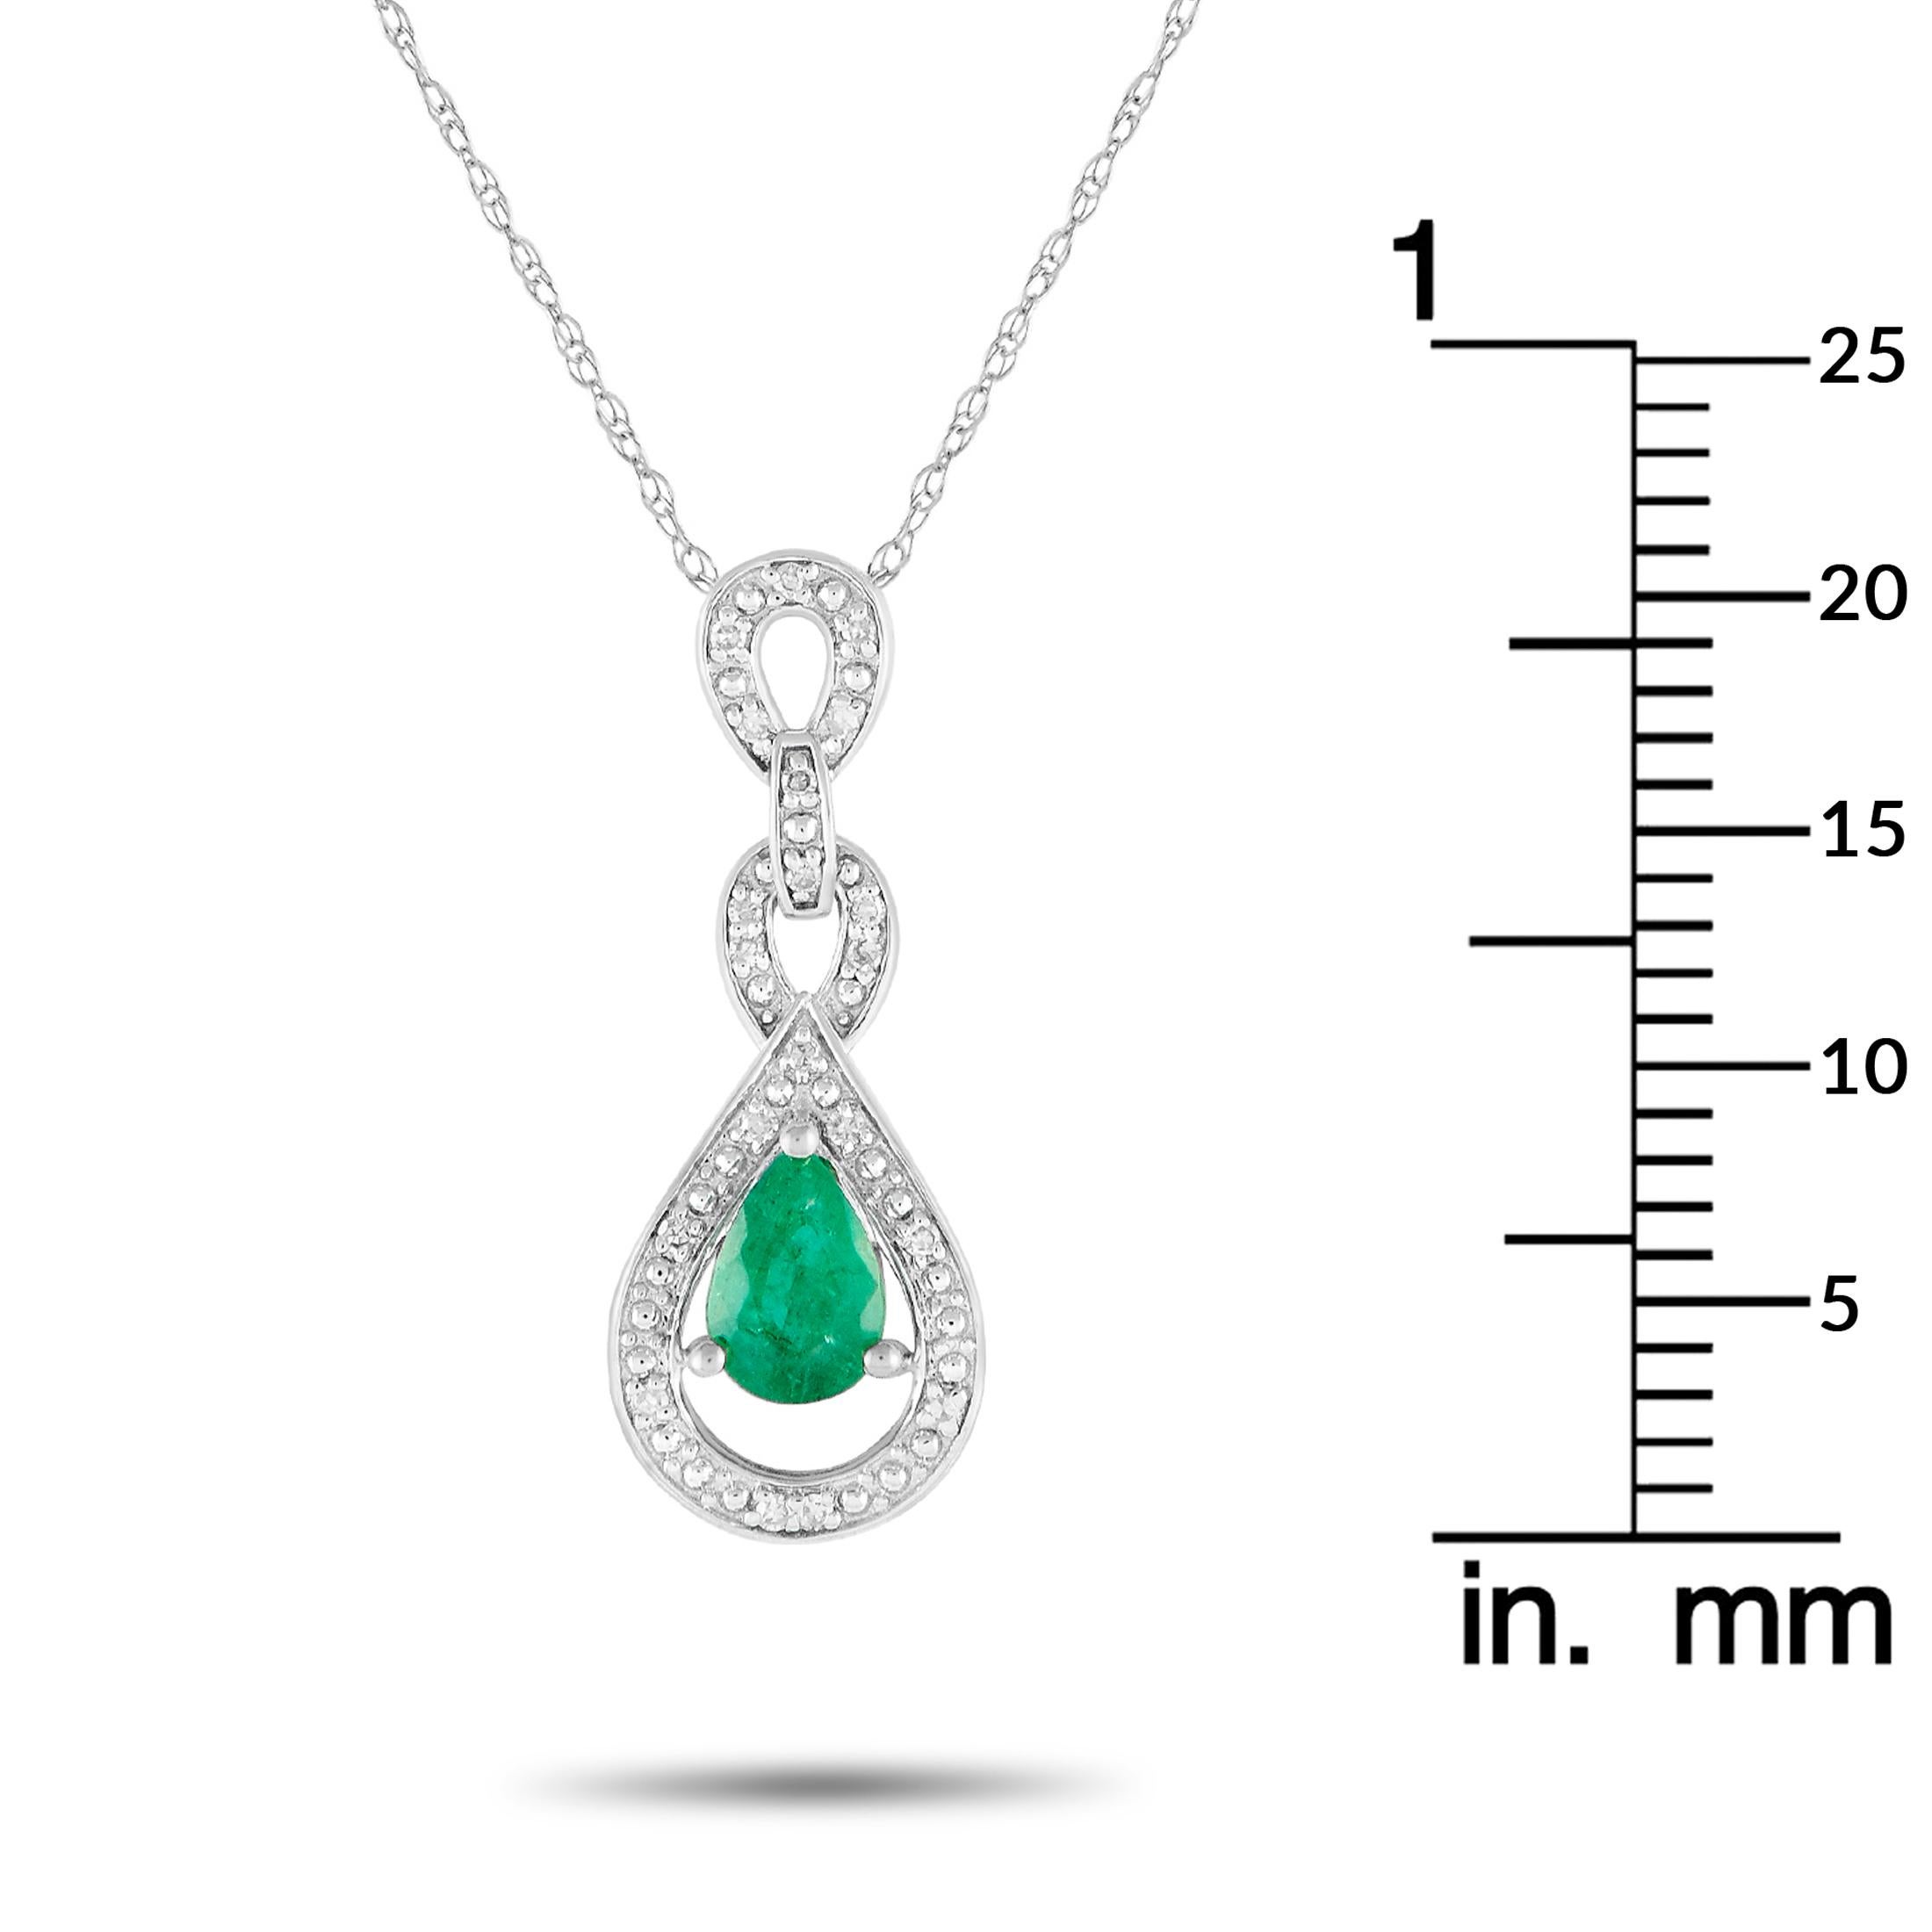 LB Exclusive 14K White Gold 0.08ct Diamond Pendant Necklace PD4-16318WEM In New Condition For Sale In Southampton, PA